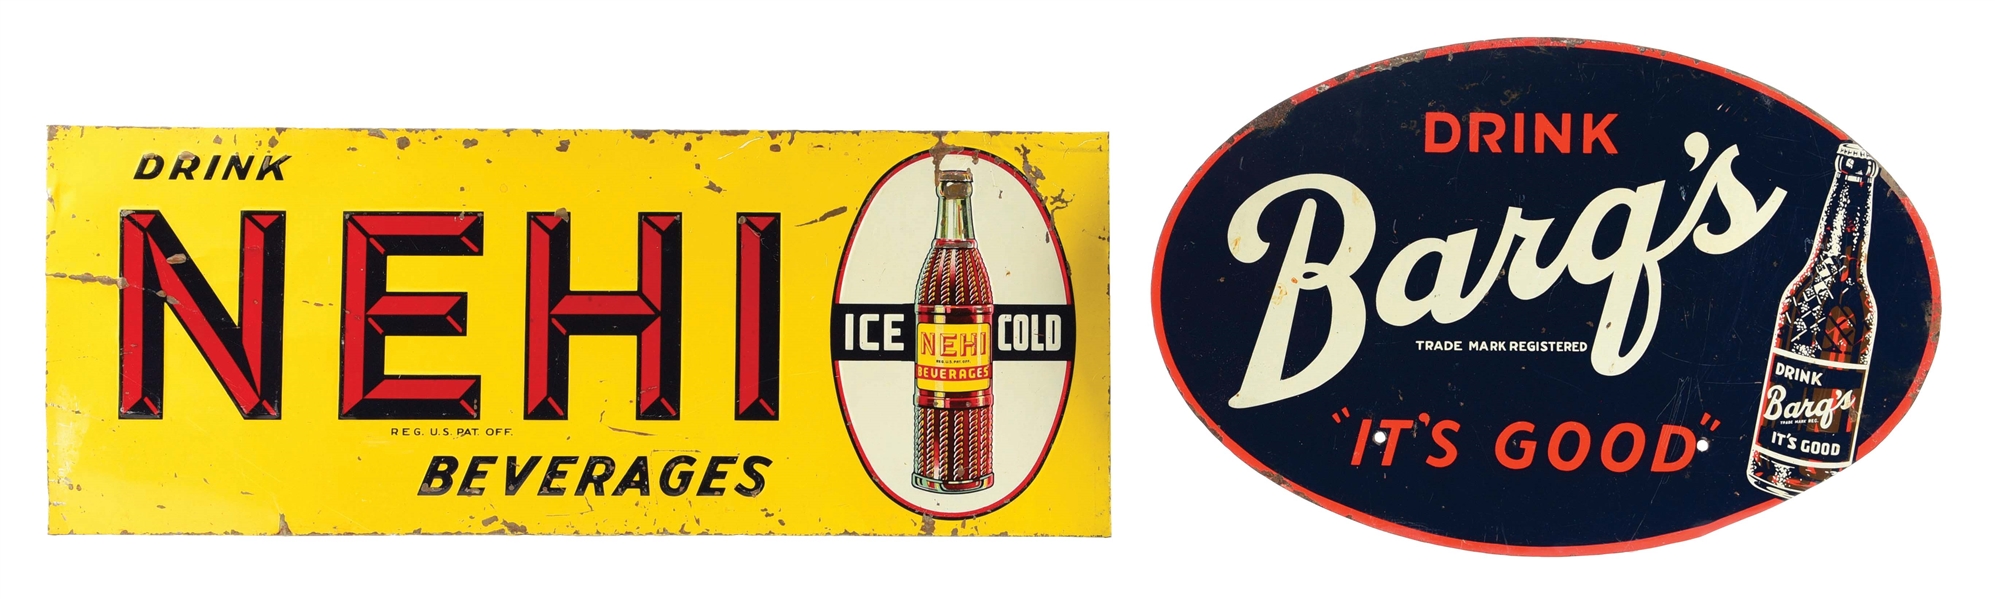 COLLECTION OF 2: DRINK BARQS SODA & NEHI SODA SIGNS.